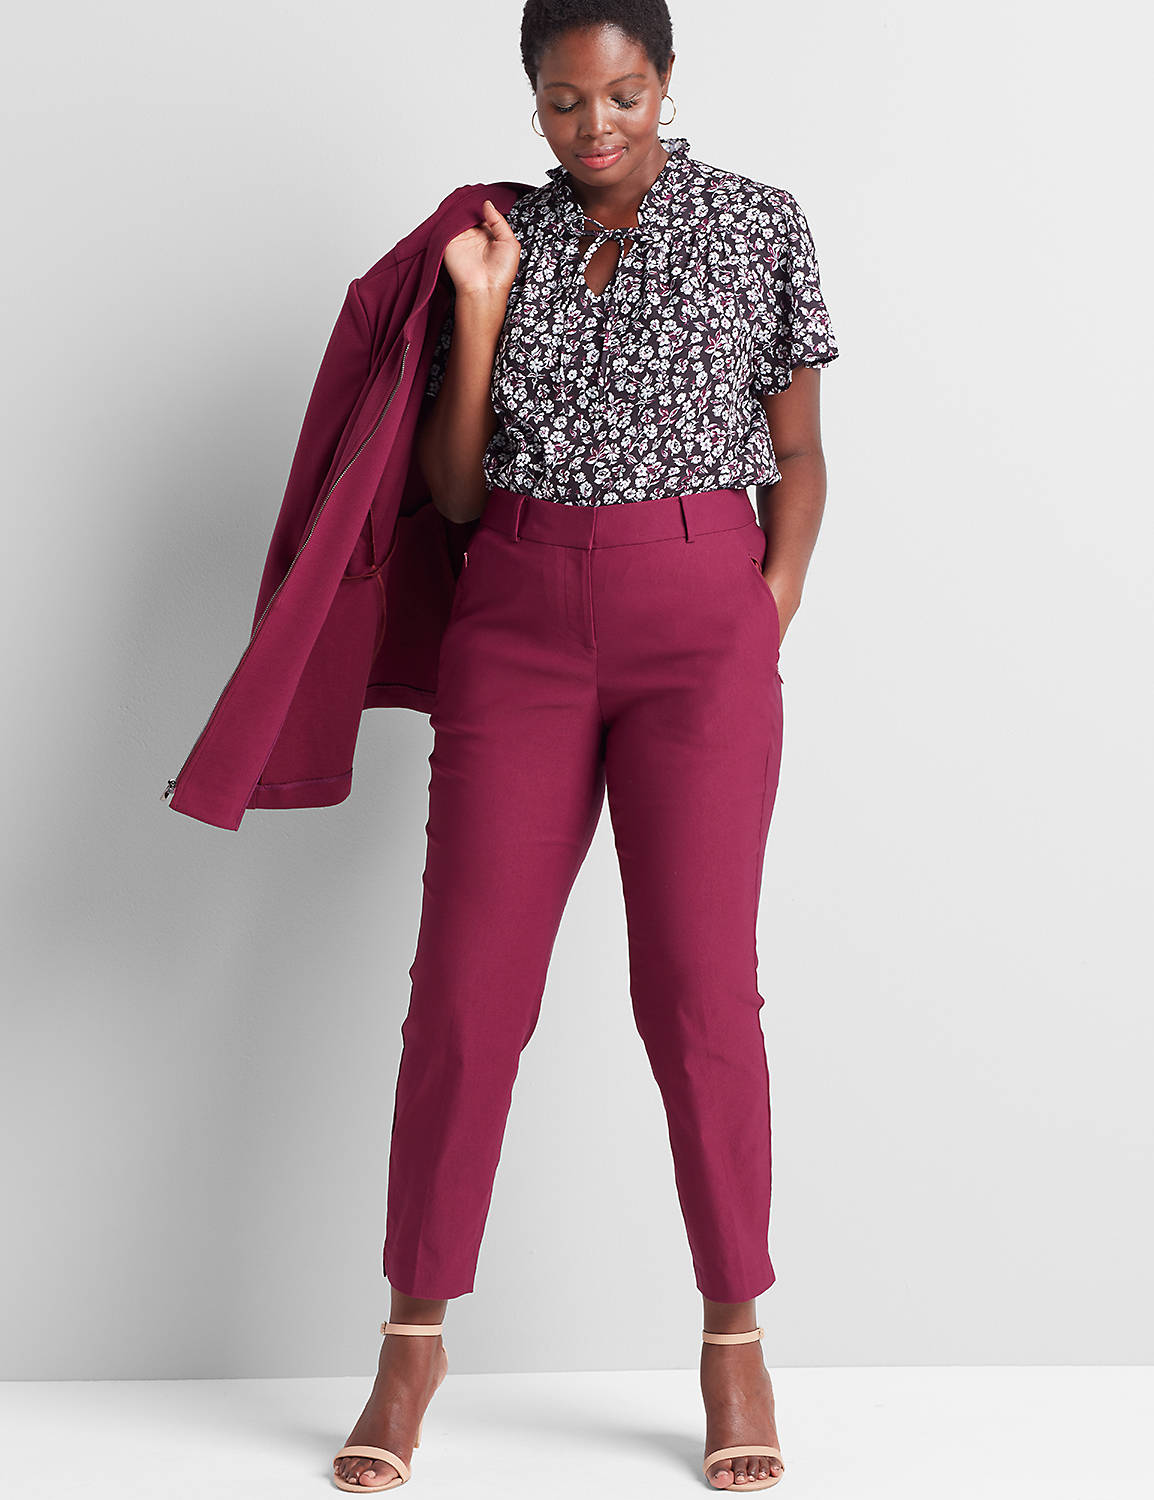 Short Sleeve Flutter Vneck with Ties Top 1113918:LBF20191_FranFloral_colorway3:12 Product Image 3